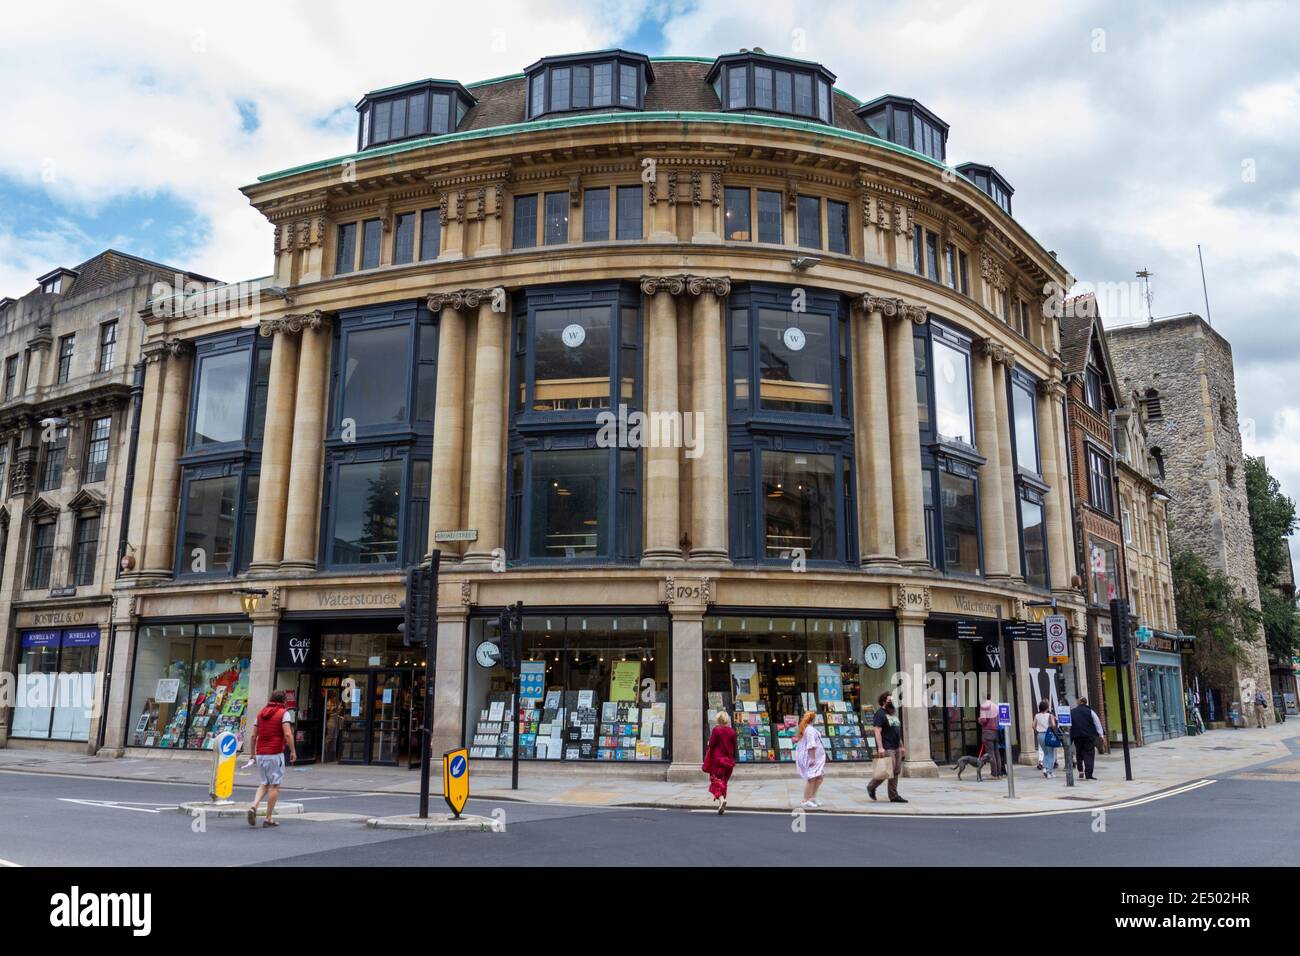 The Waterstones bookshop, (a mainstream and academic book retailer),  William Baker House (built 1914), Broad St, Oxford, Oxfordshire, UK. Stock Photo